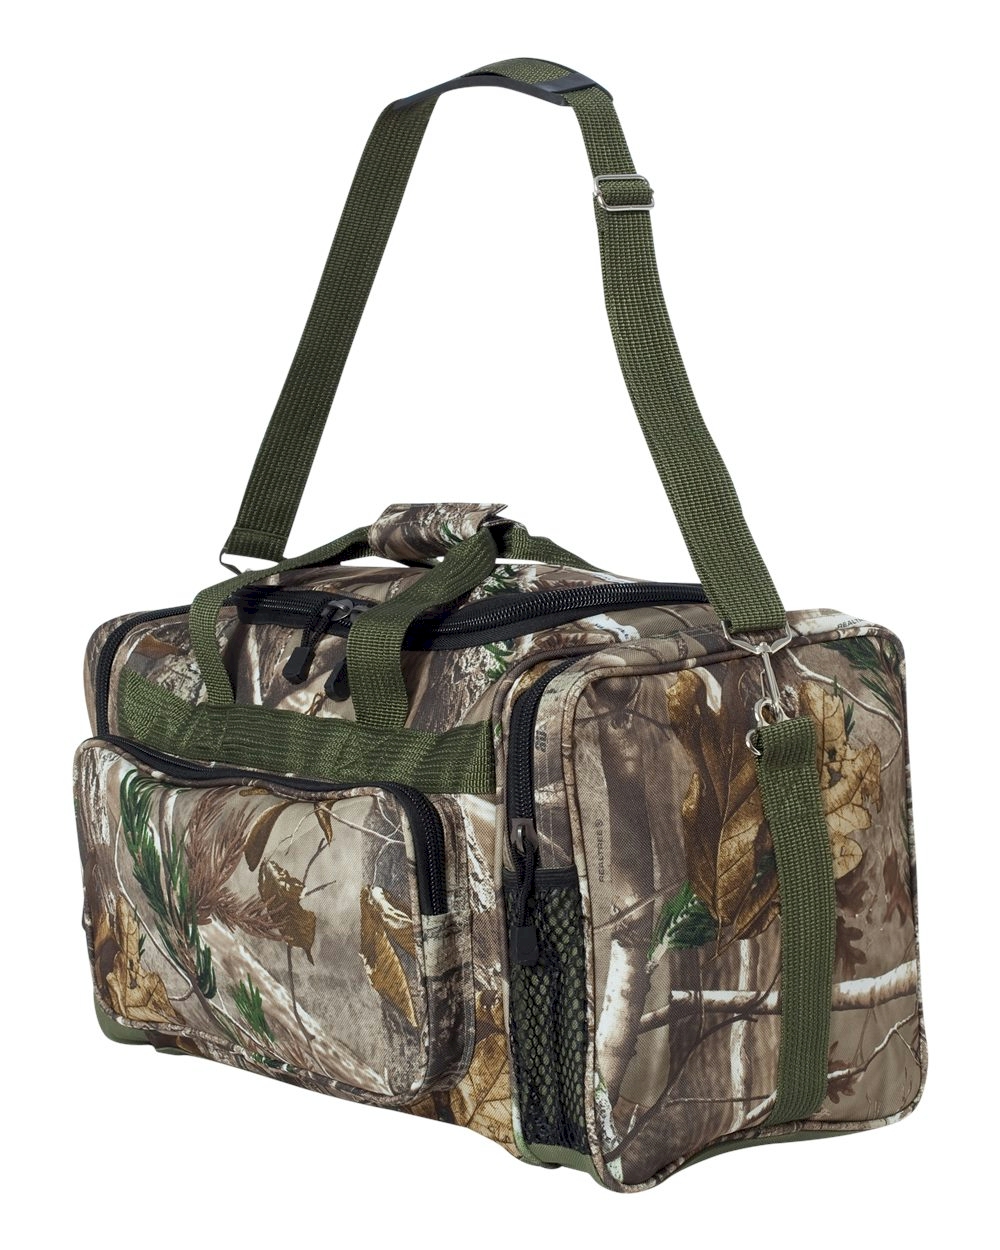 Duffel Bag Embroidery Blanks - REALTREE ALL PURPOSE